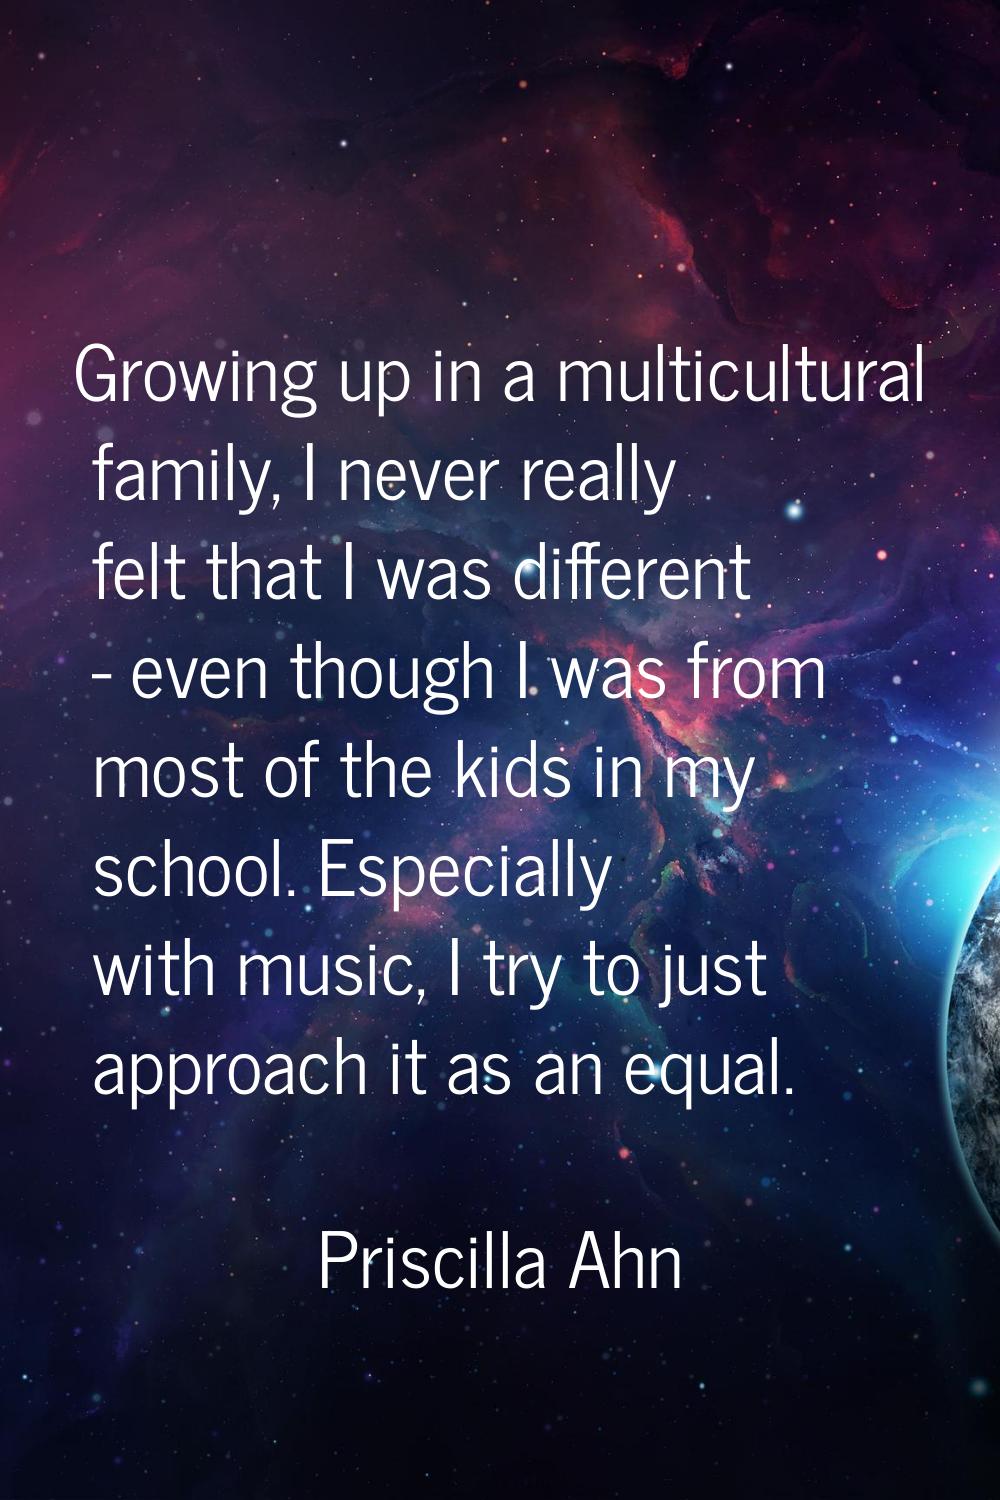 Growing up in a multicultural family, I never really felt that I was different - even though I was 